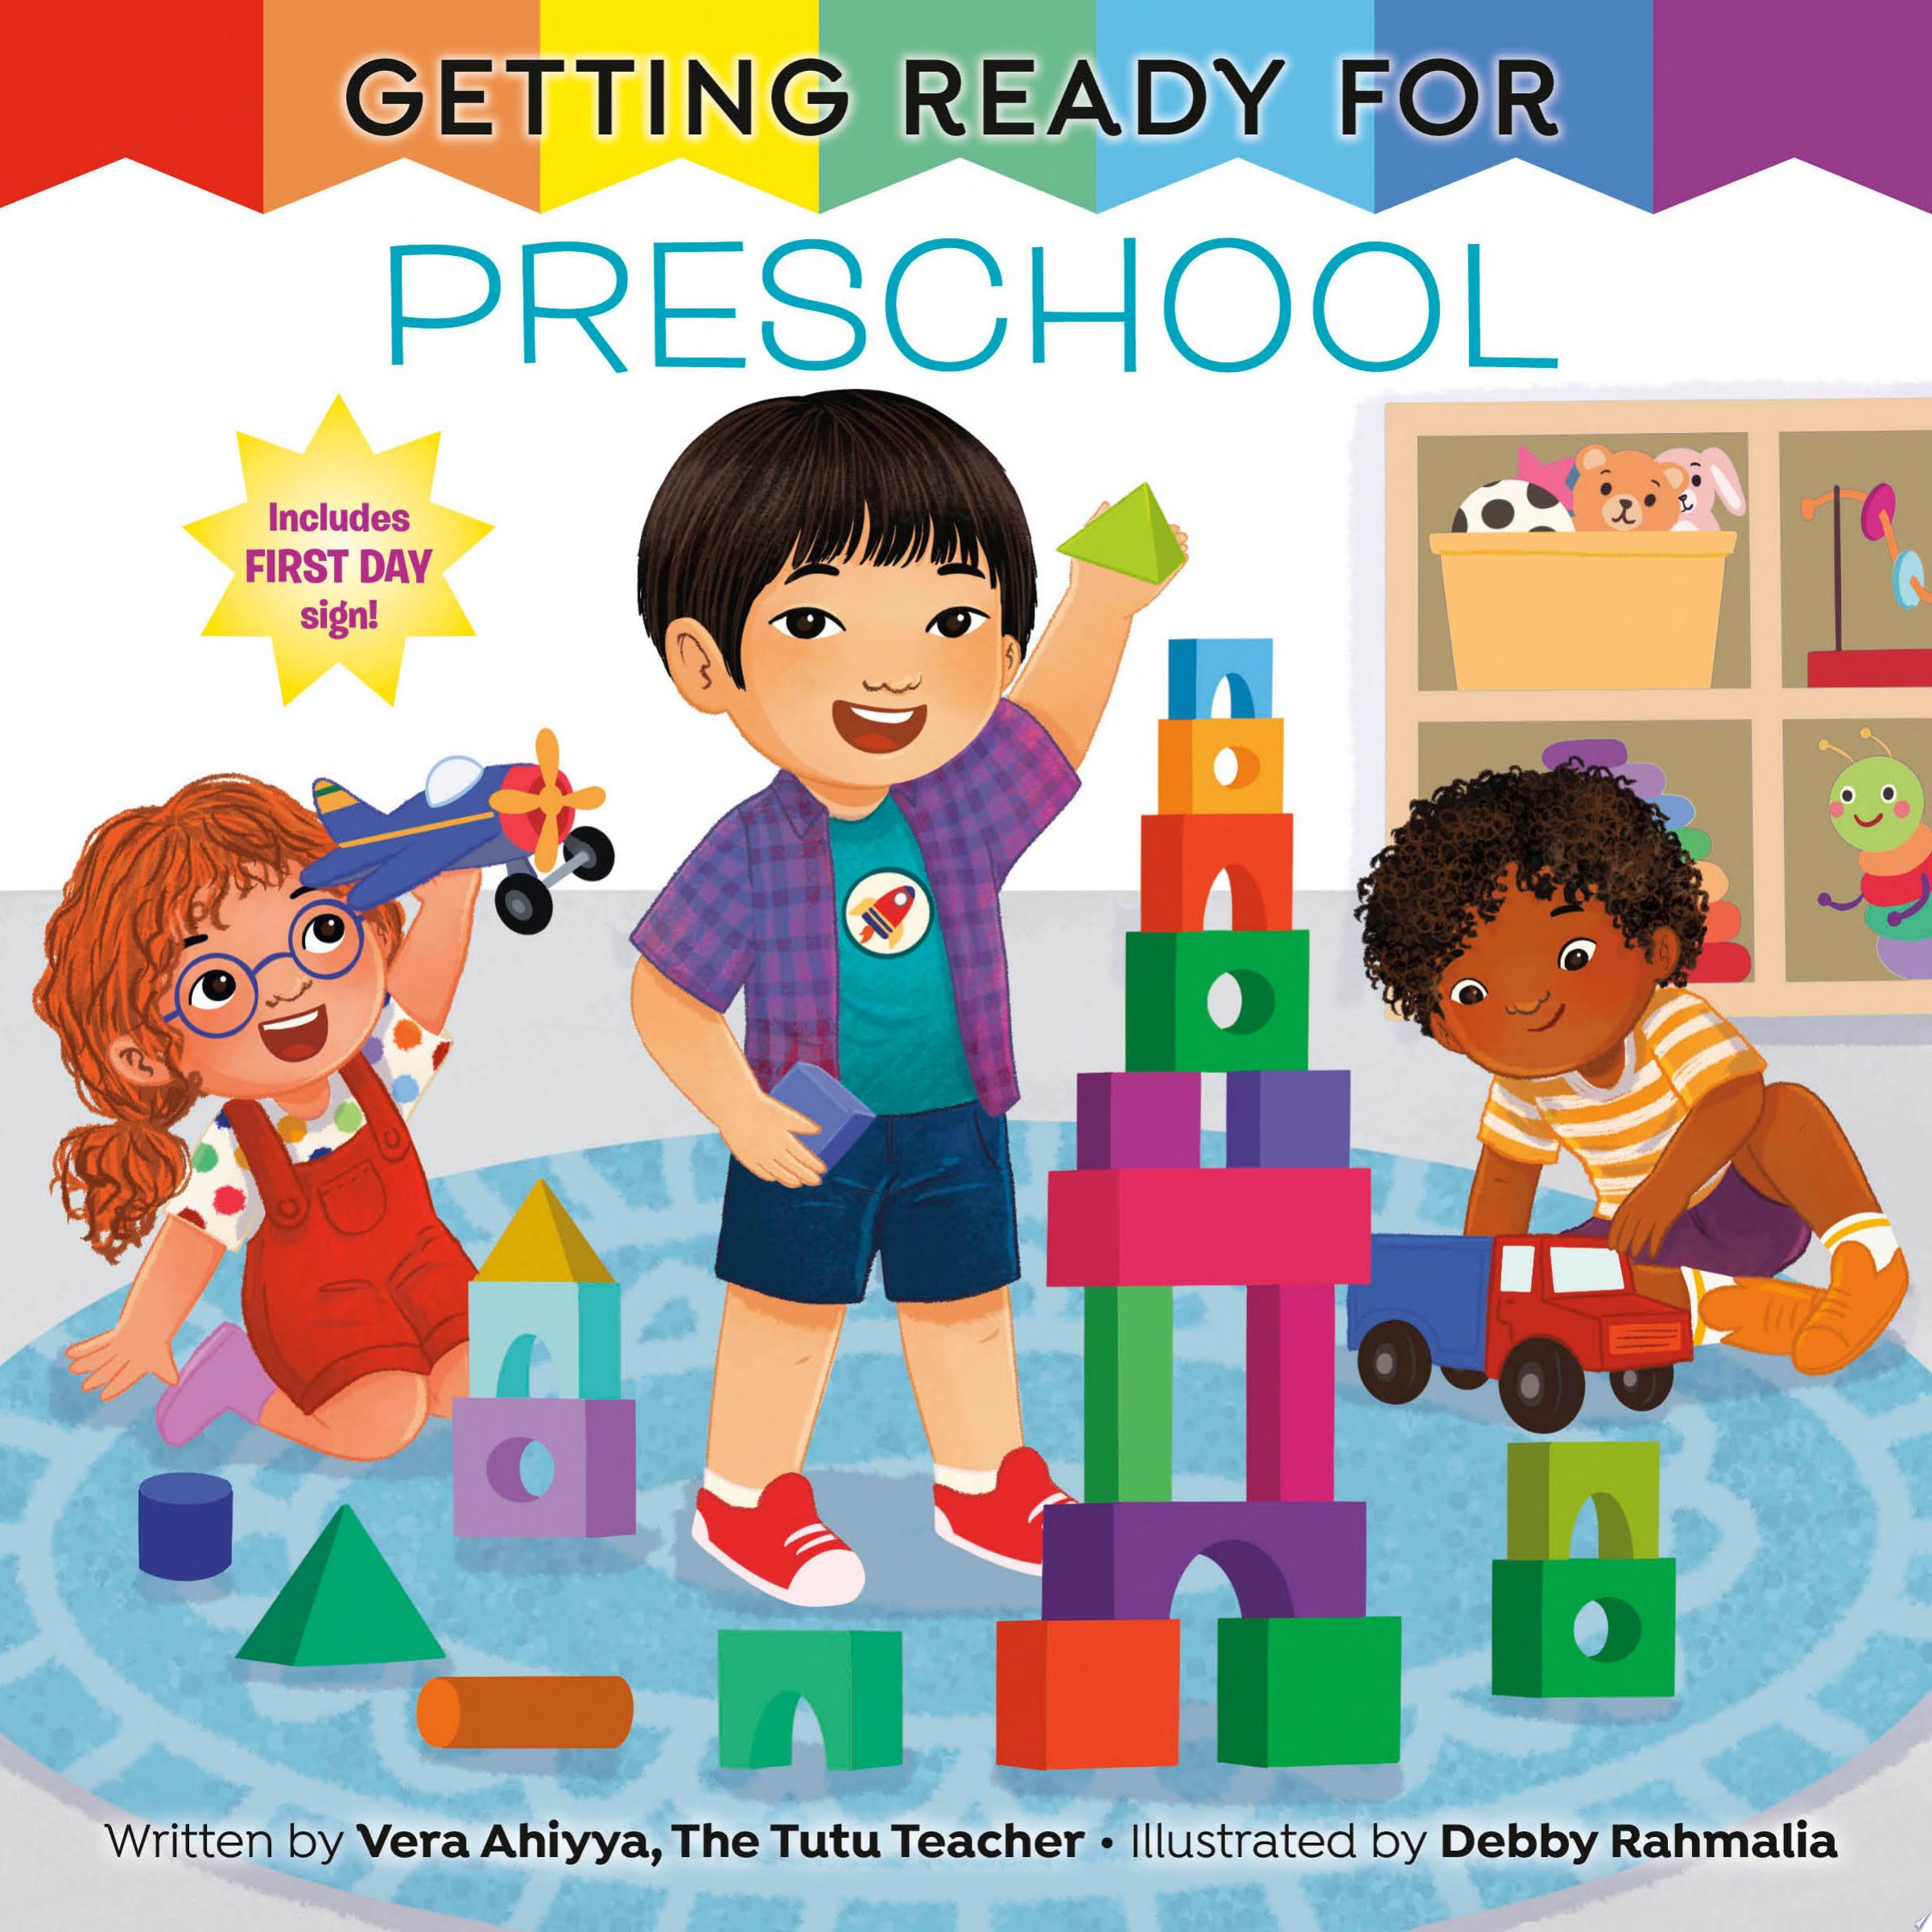 Image for "Getting Ready for Preschool"